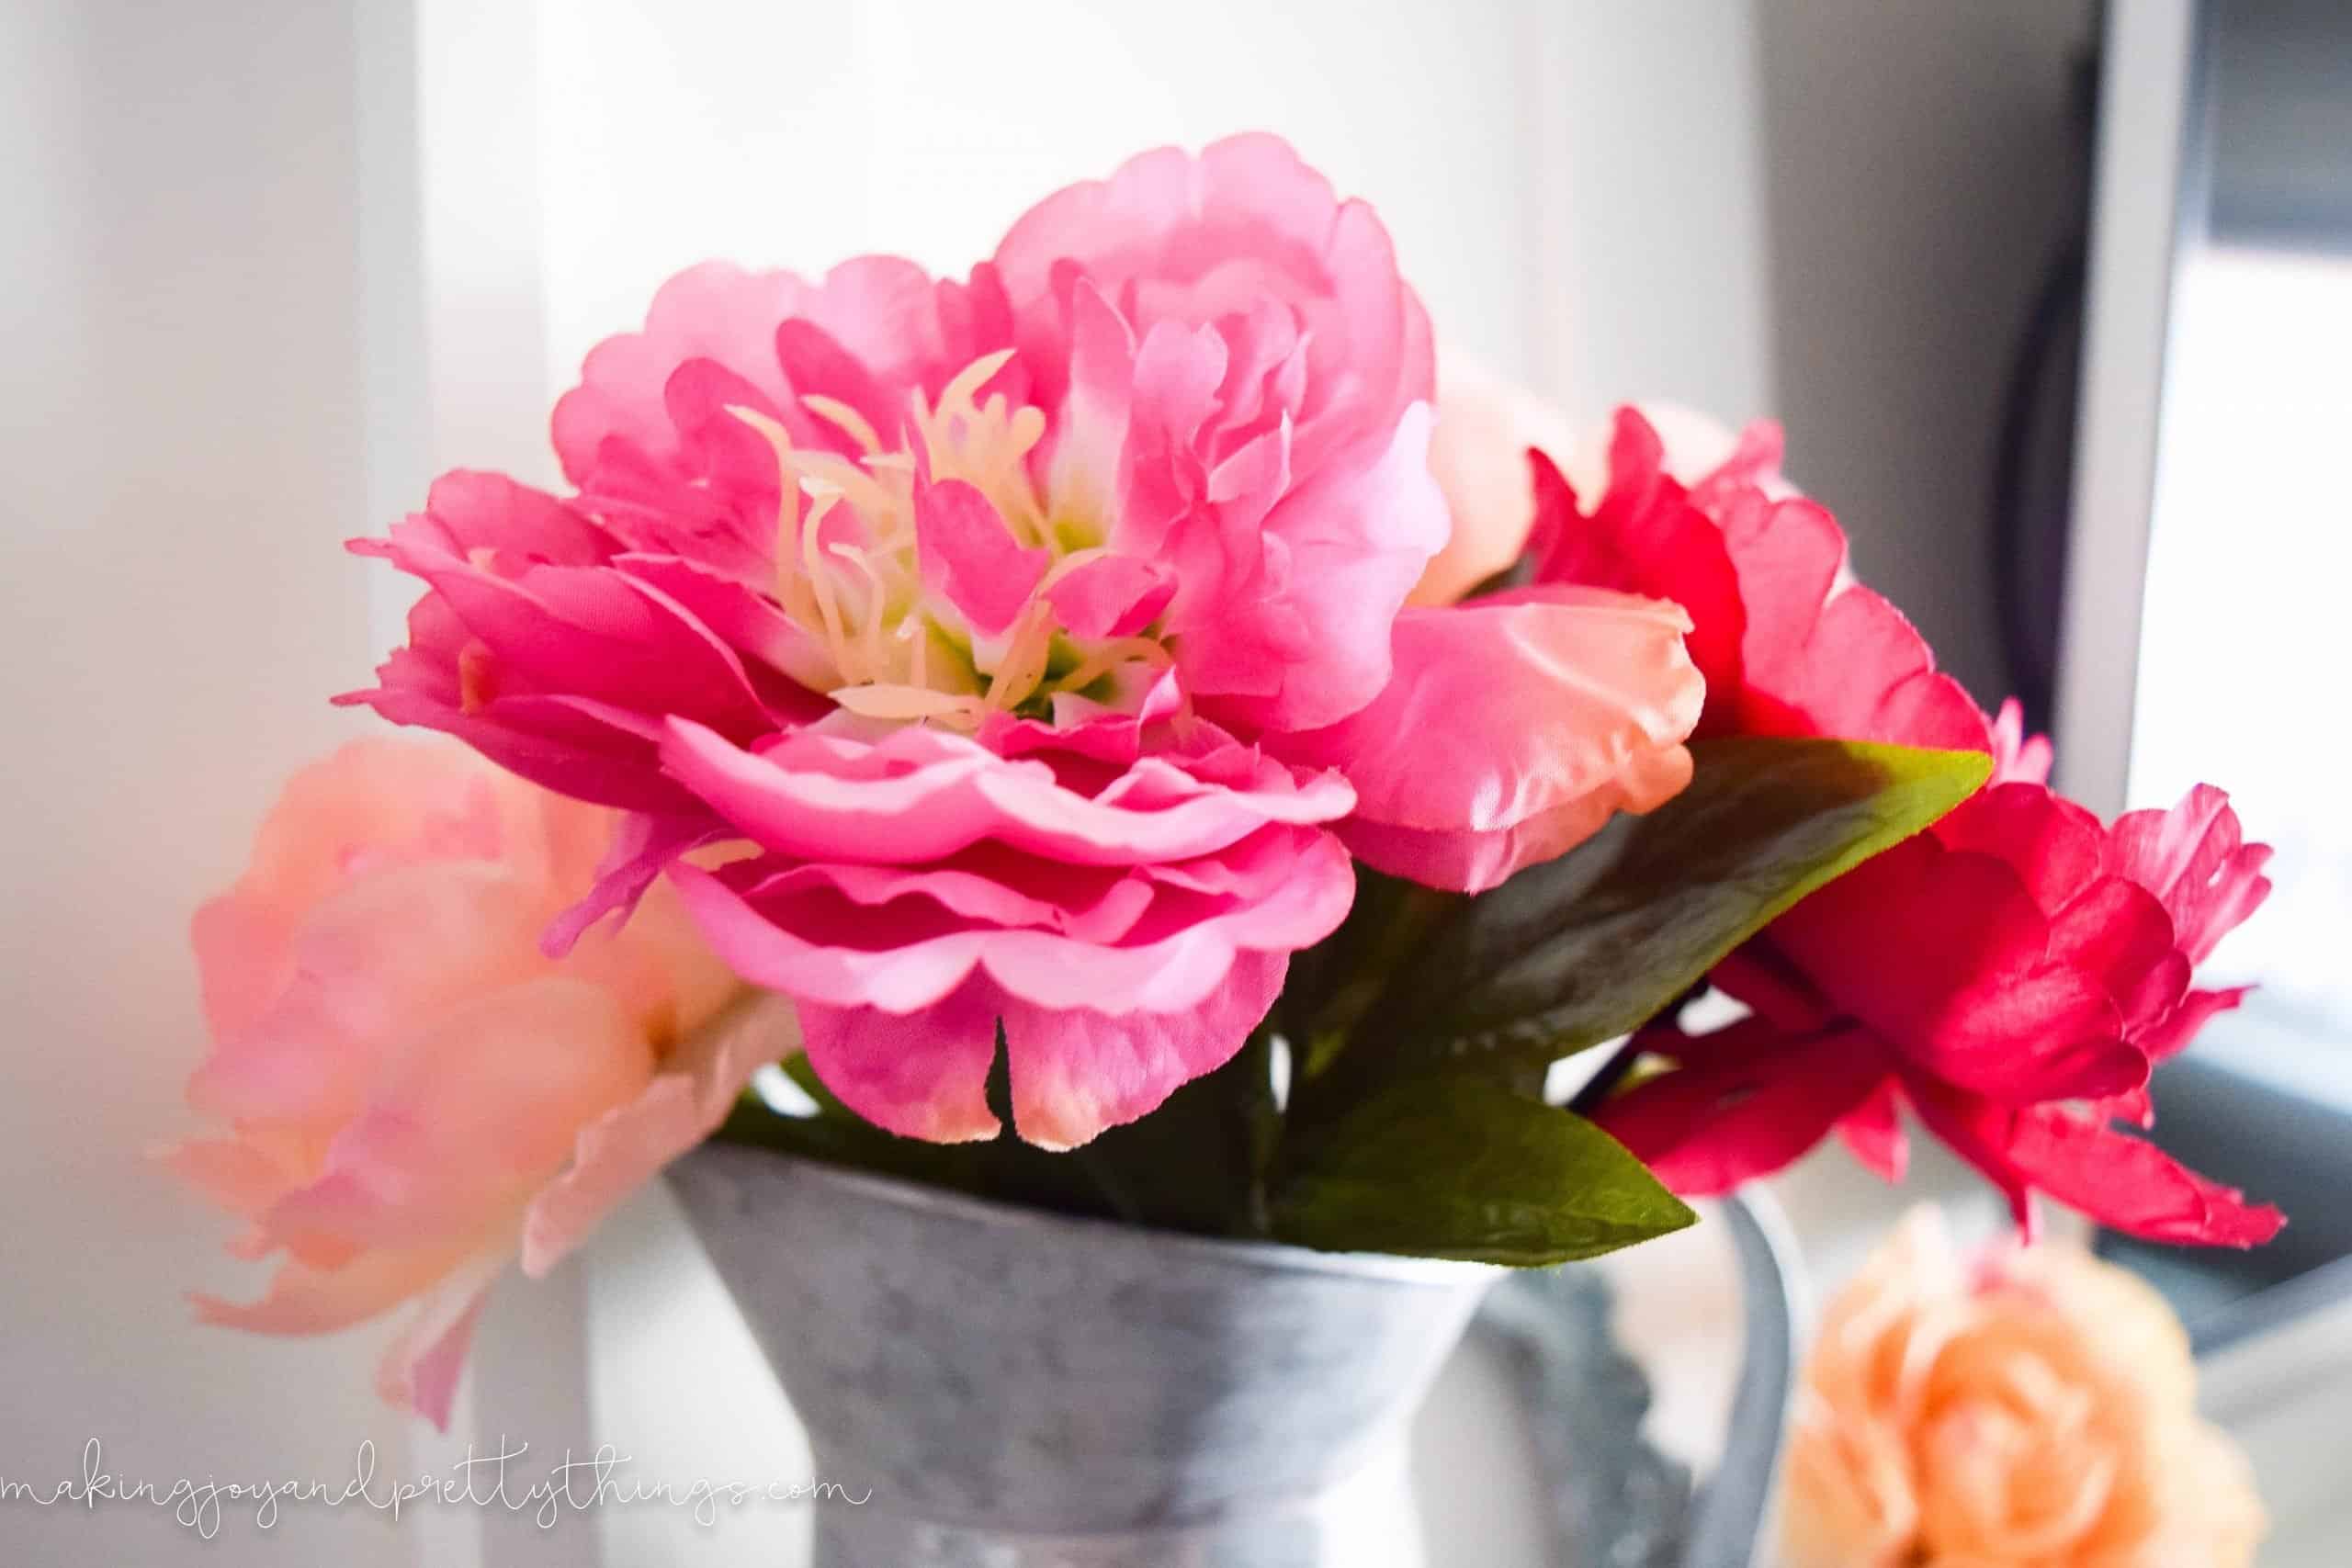 Stems of faux florals in varying shades of pink in a galvanized metal vase.